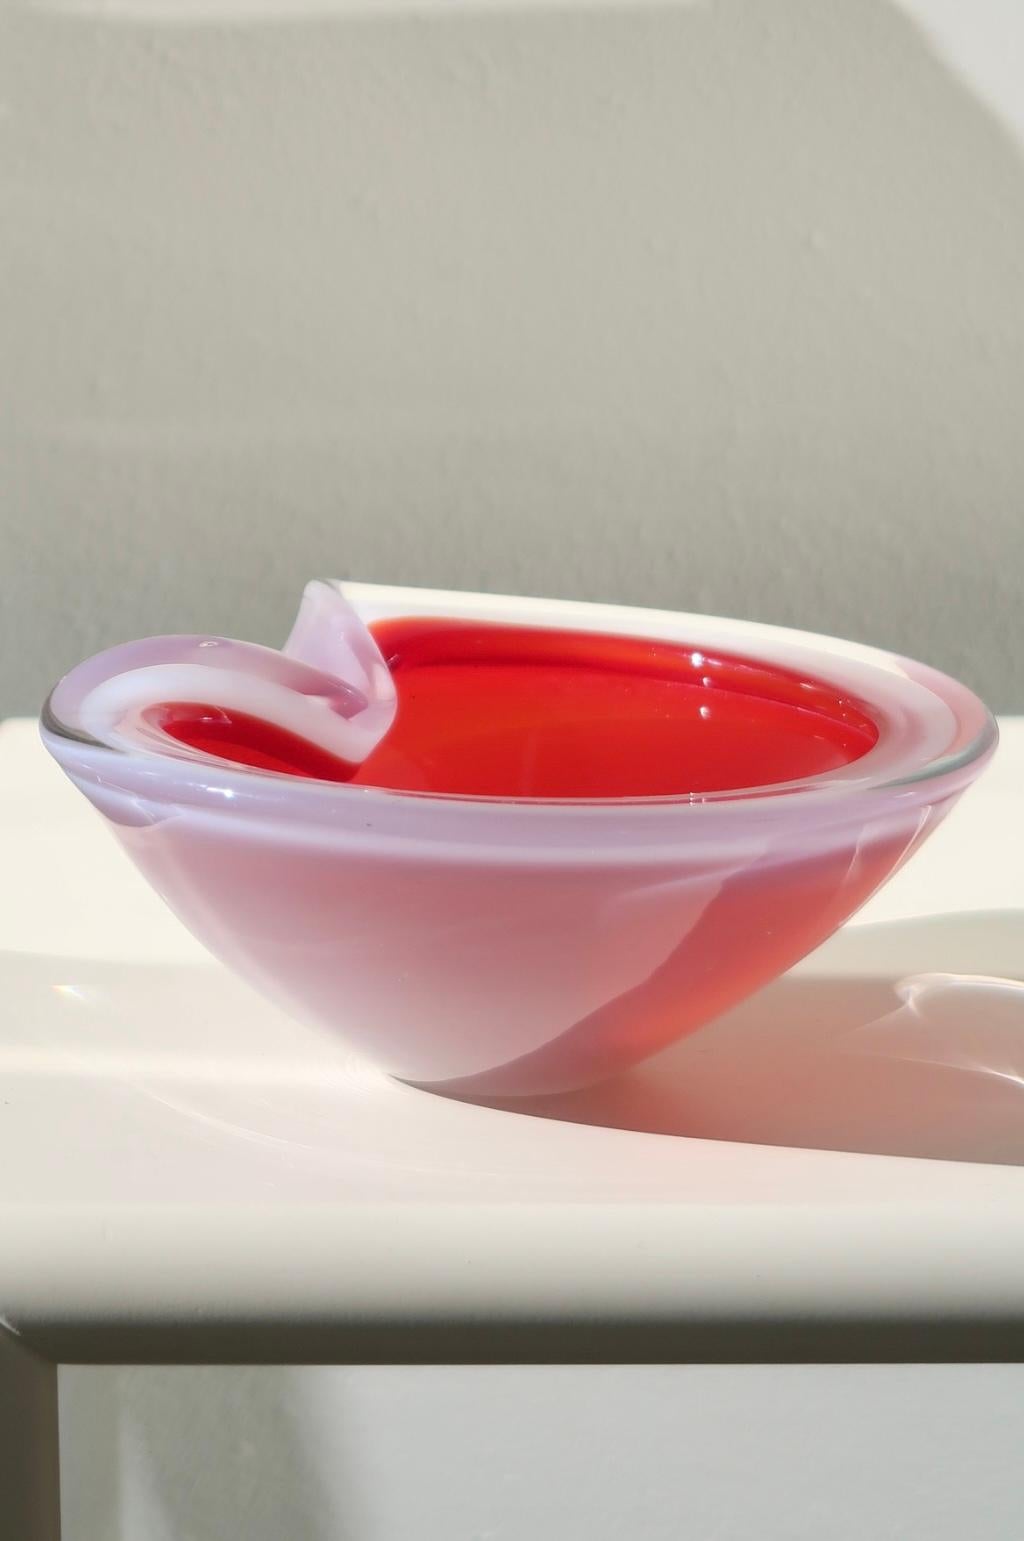 Beautiful vintage Seguso Murano glass bowl. The bowl is mouth-blown in solid opalescent glass in shades of red and white. Made in Sommerso technique - a fantastic piece of craftsmanship. Handmade in Italy, 1970s. W: 18 cm L: 16 cm.

